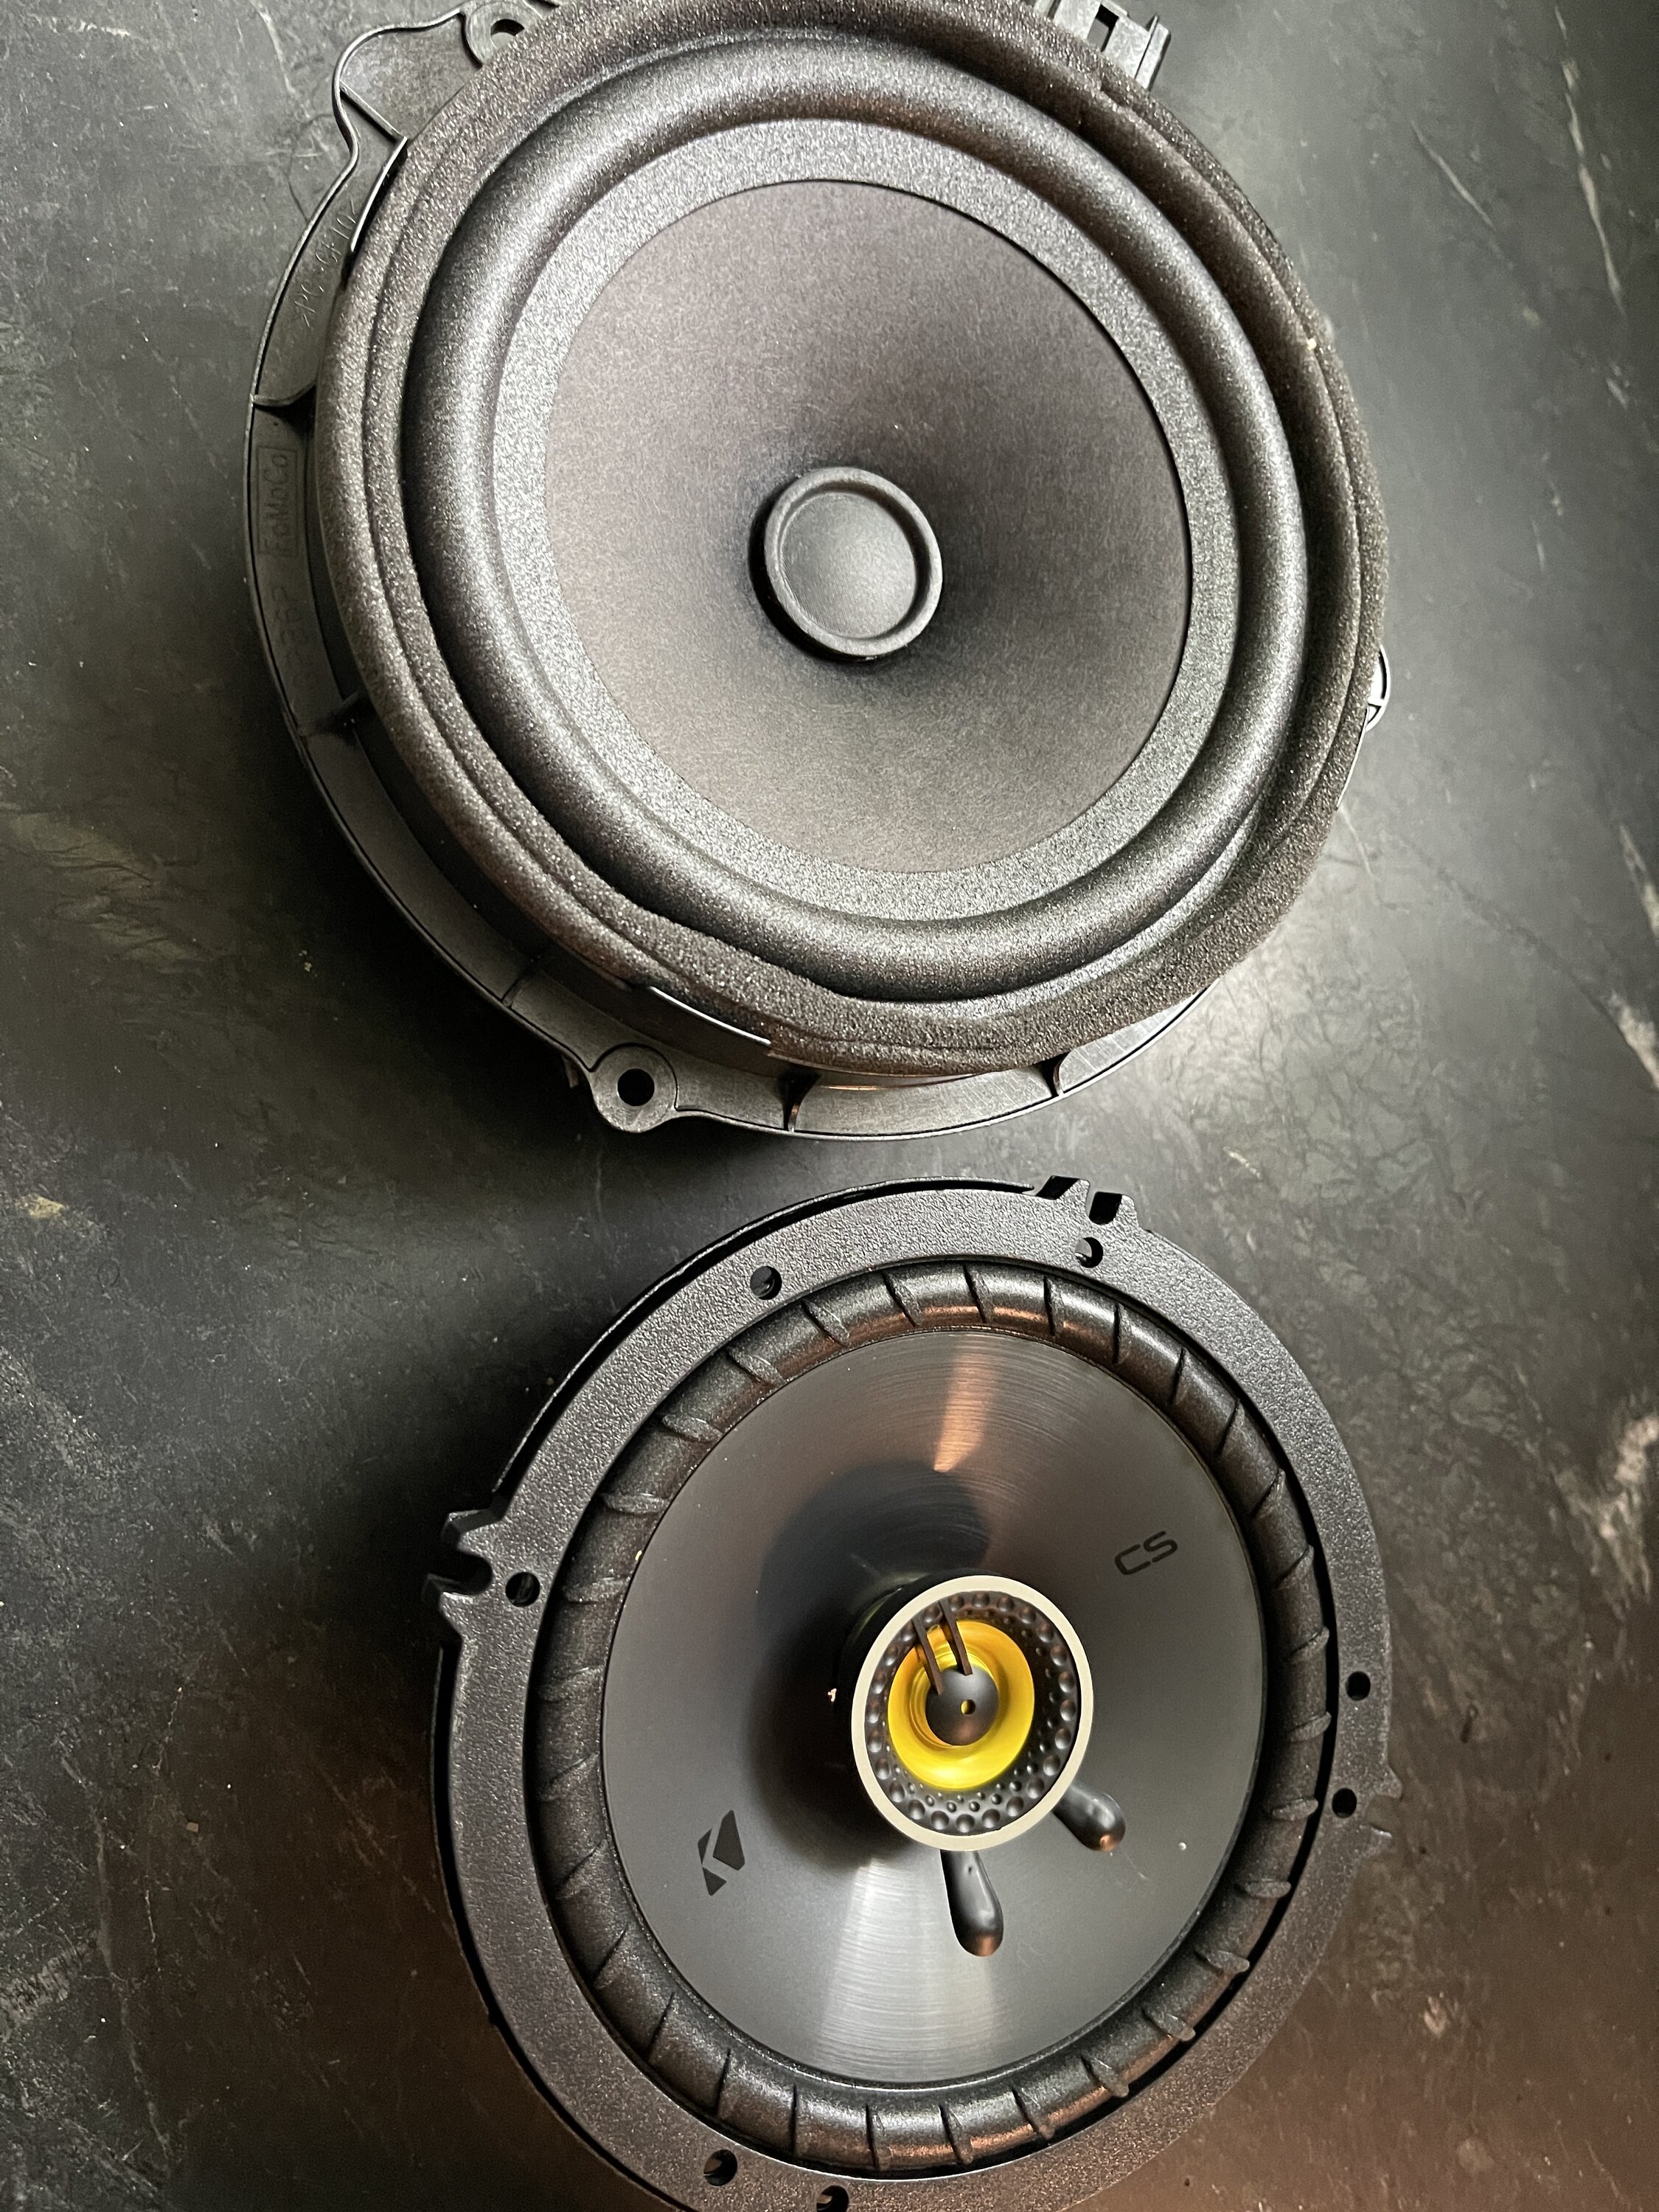 Ford Bronco B&O front speakers worth changing? F22090E7-3D15-46D2-A653-044227B18E79